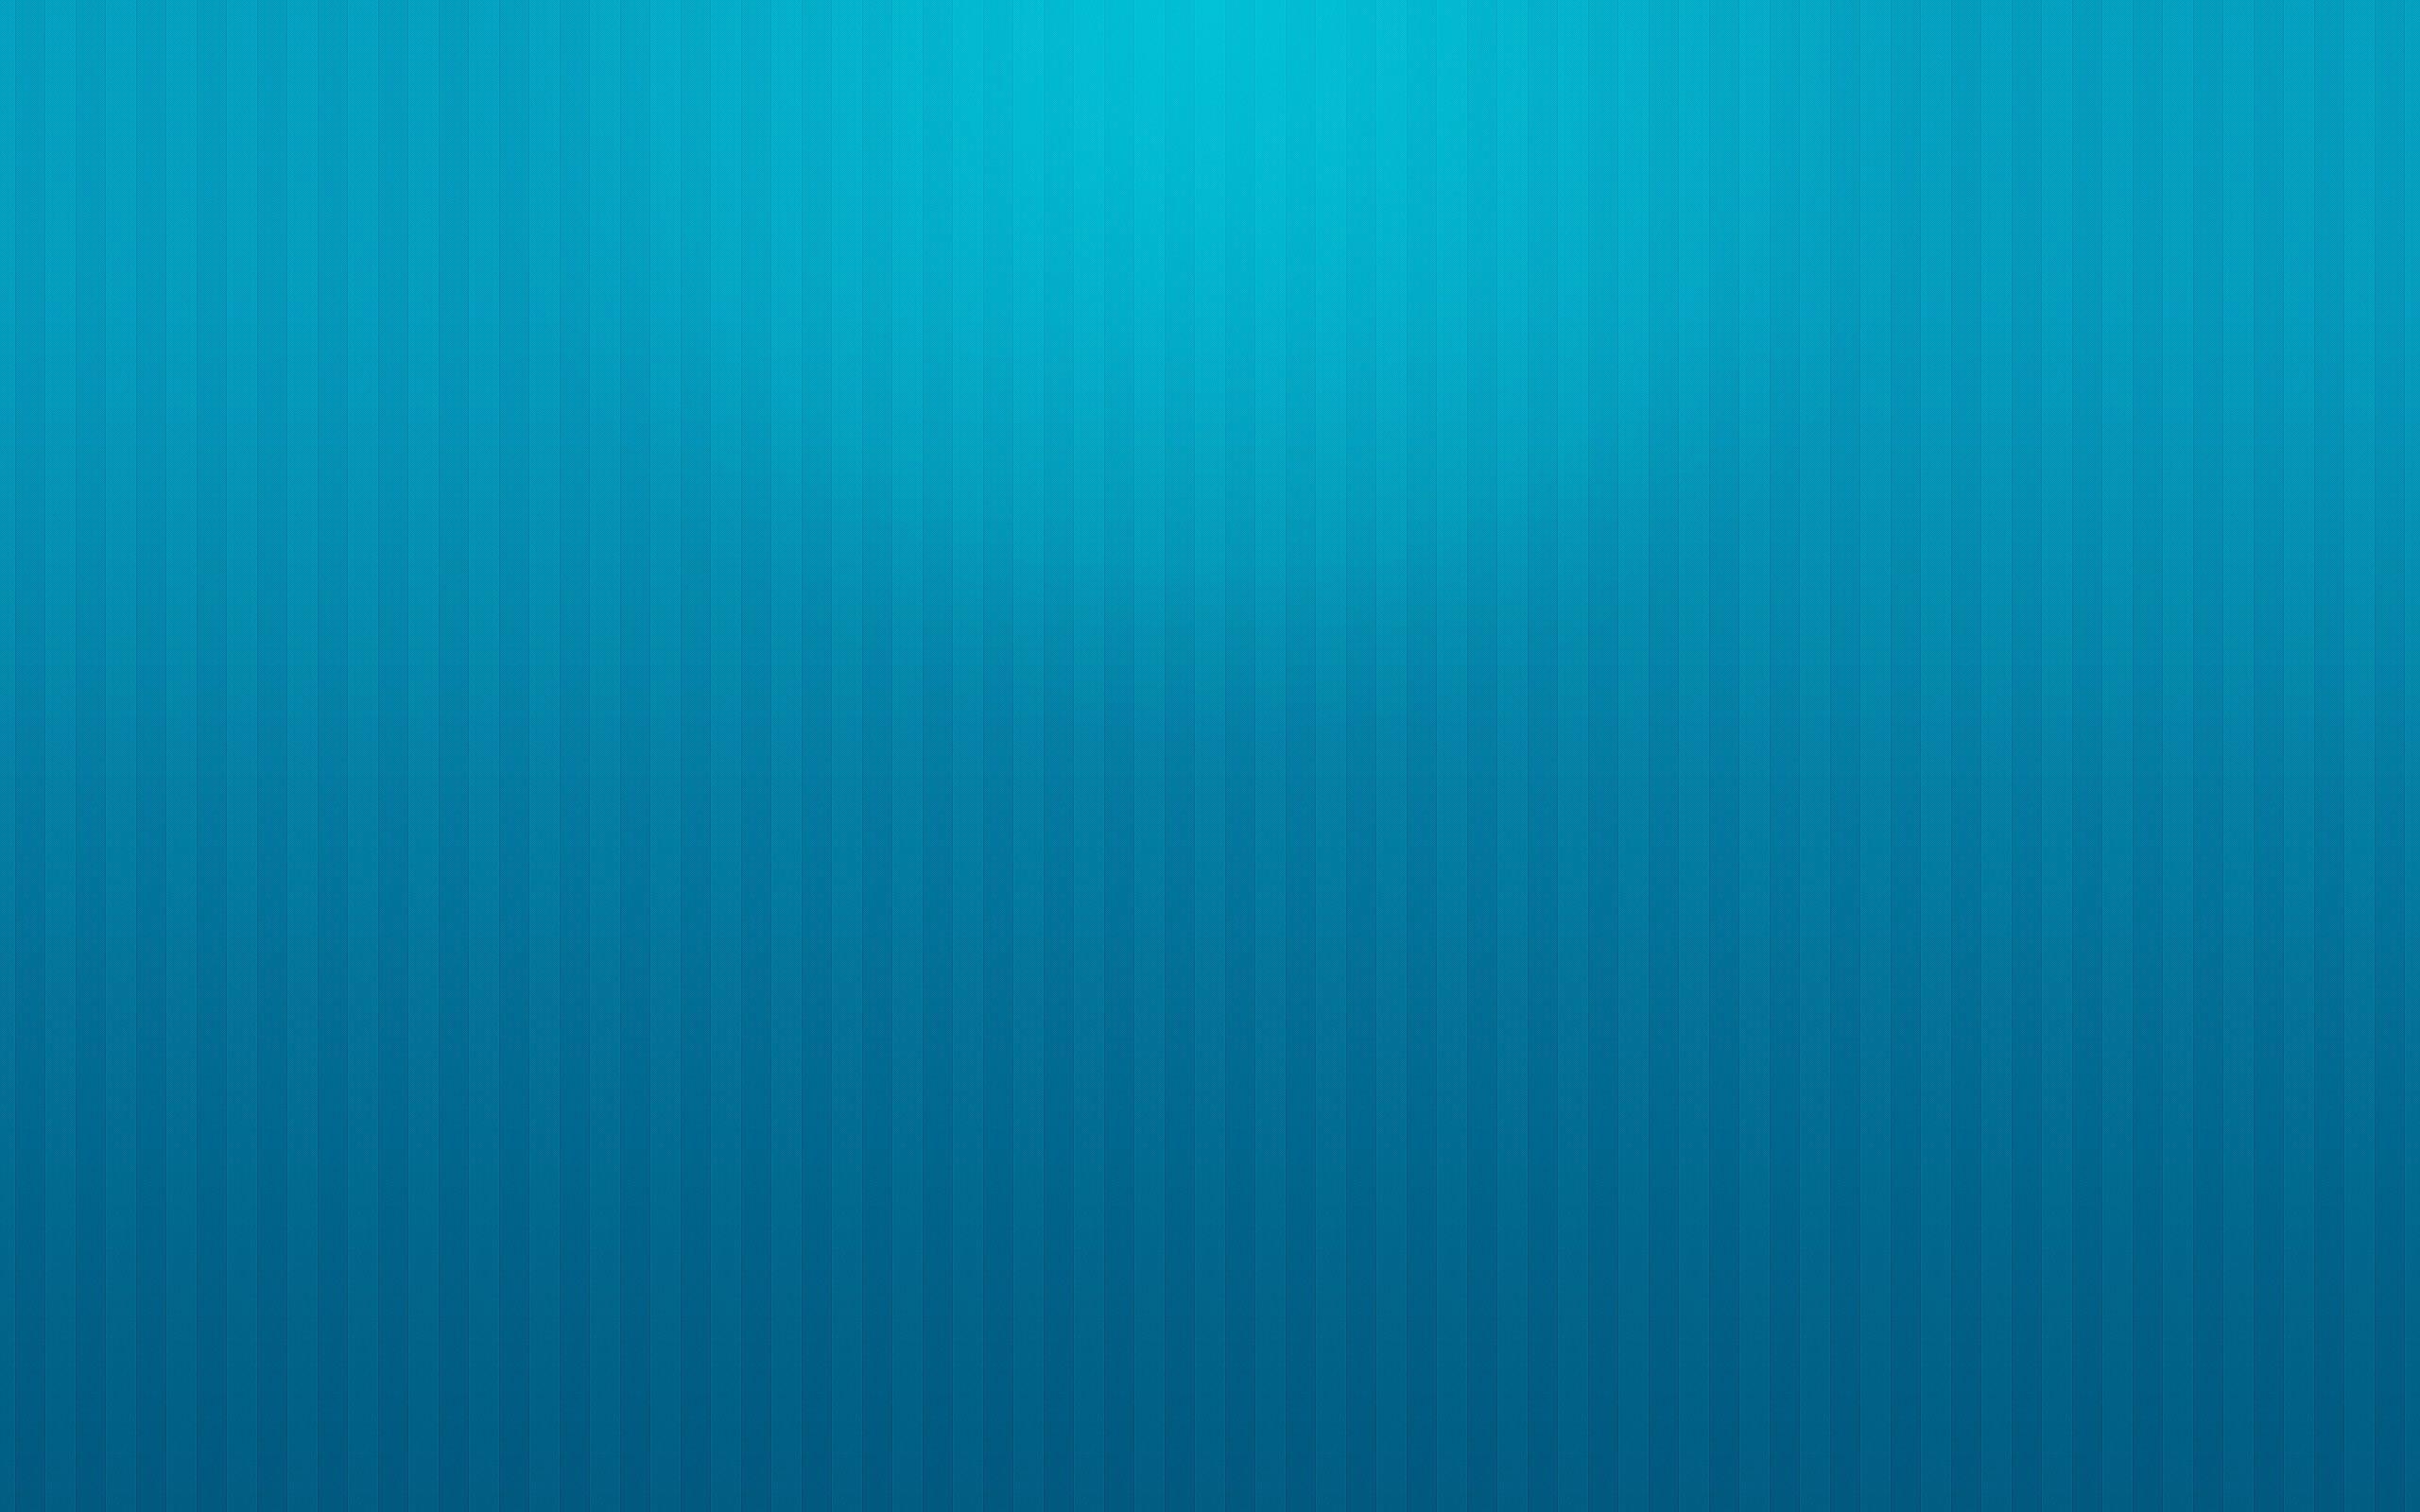 Plain Light Blue Backgrounds Wallpapers 1024x768PX ~ Wallpapers